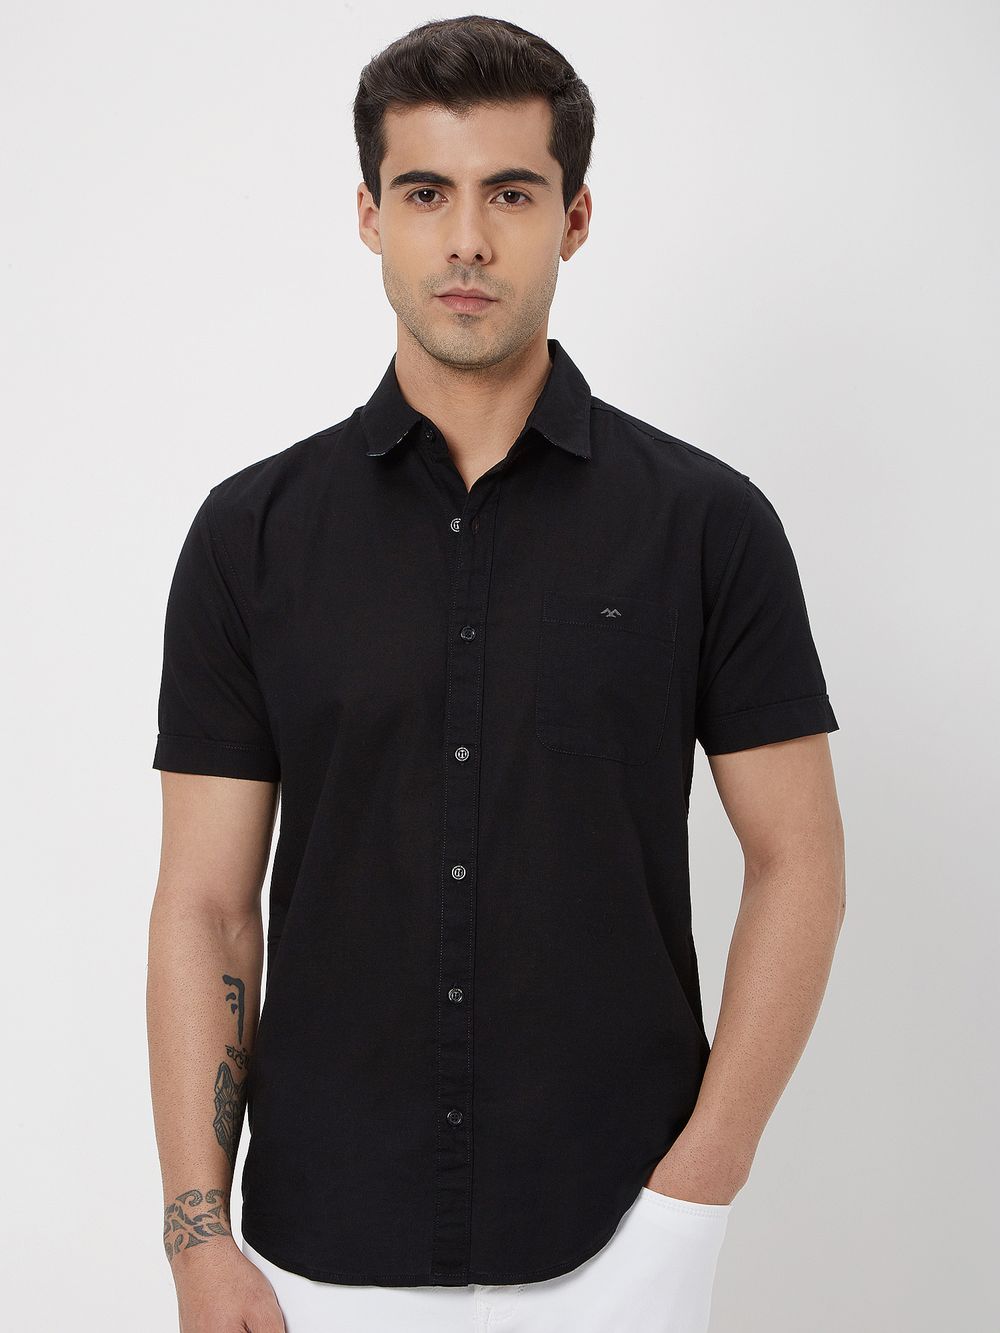 Mens Shirts Sale - Great Offers & Discounts on Mufti Shirts